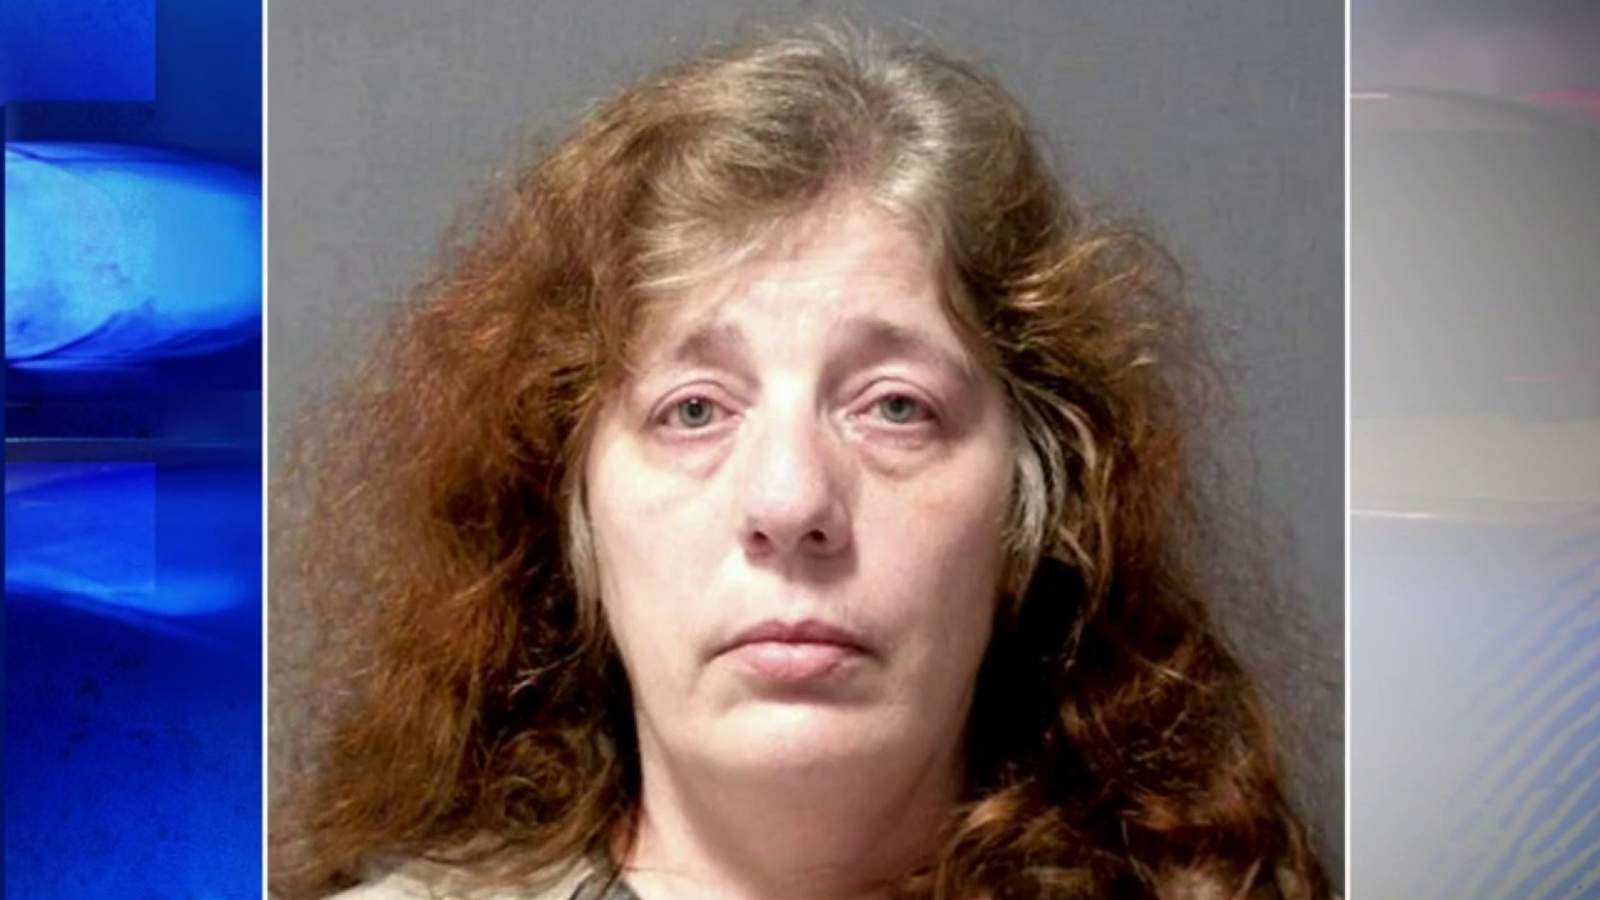 Monroe County woman arrested for attempting to hire hitman to kill ex-husband